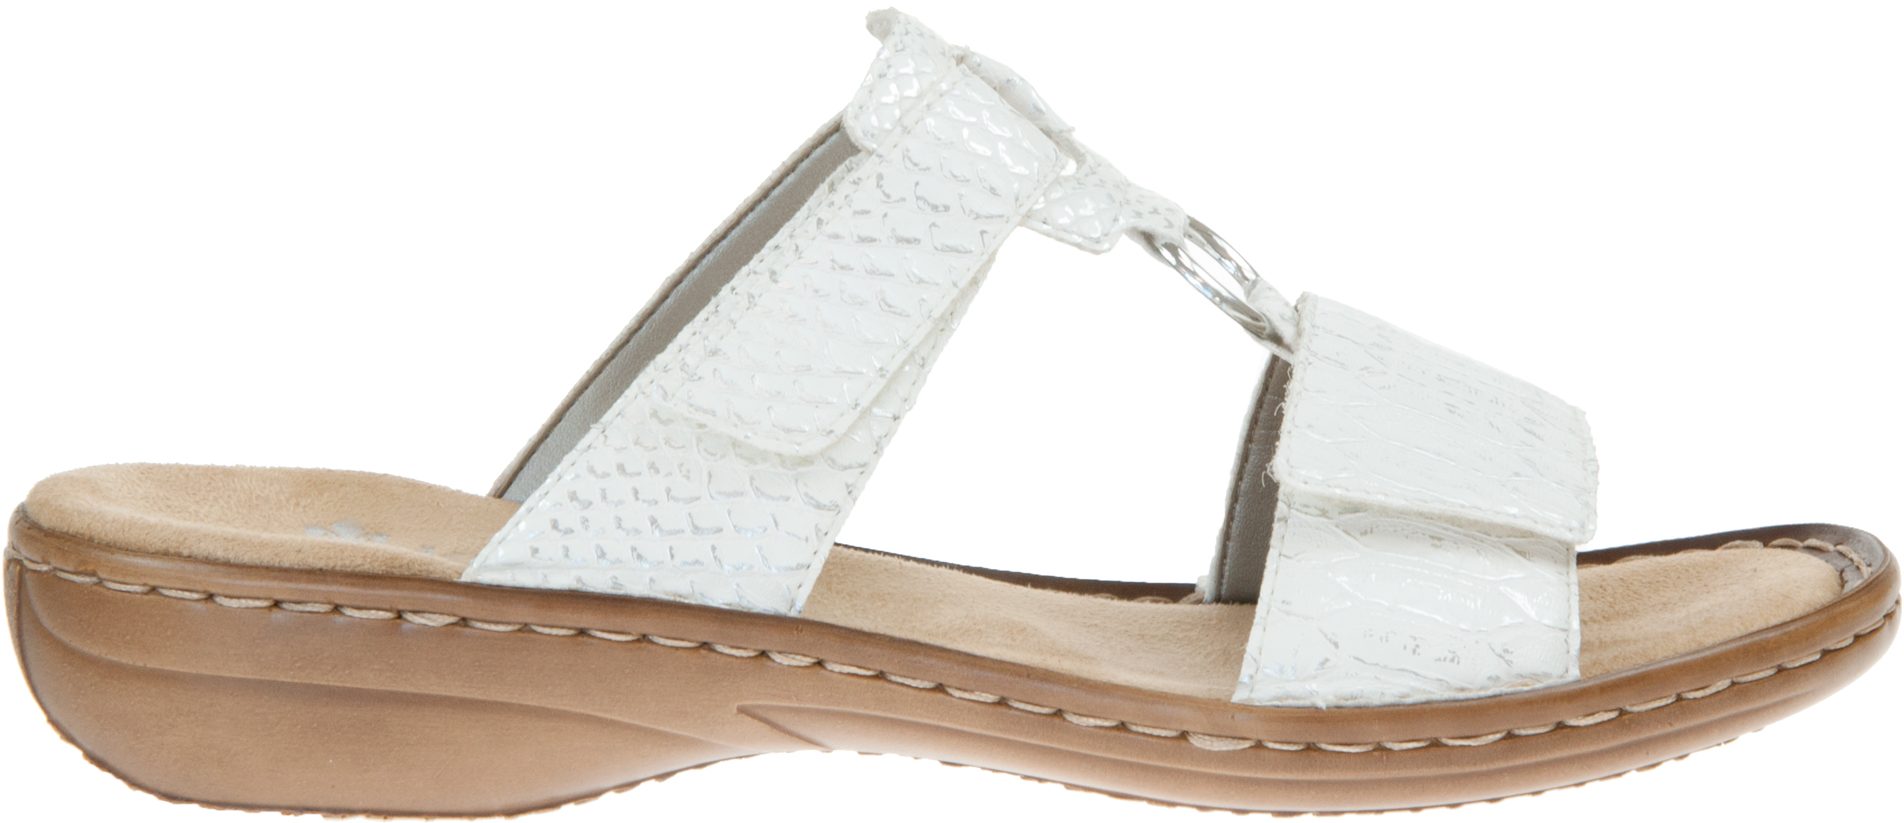 Rieker Lucy White / Silver 608P9-80 - Mule Sandals - Humphries Shoes